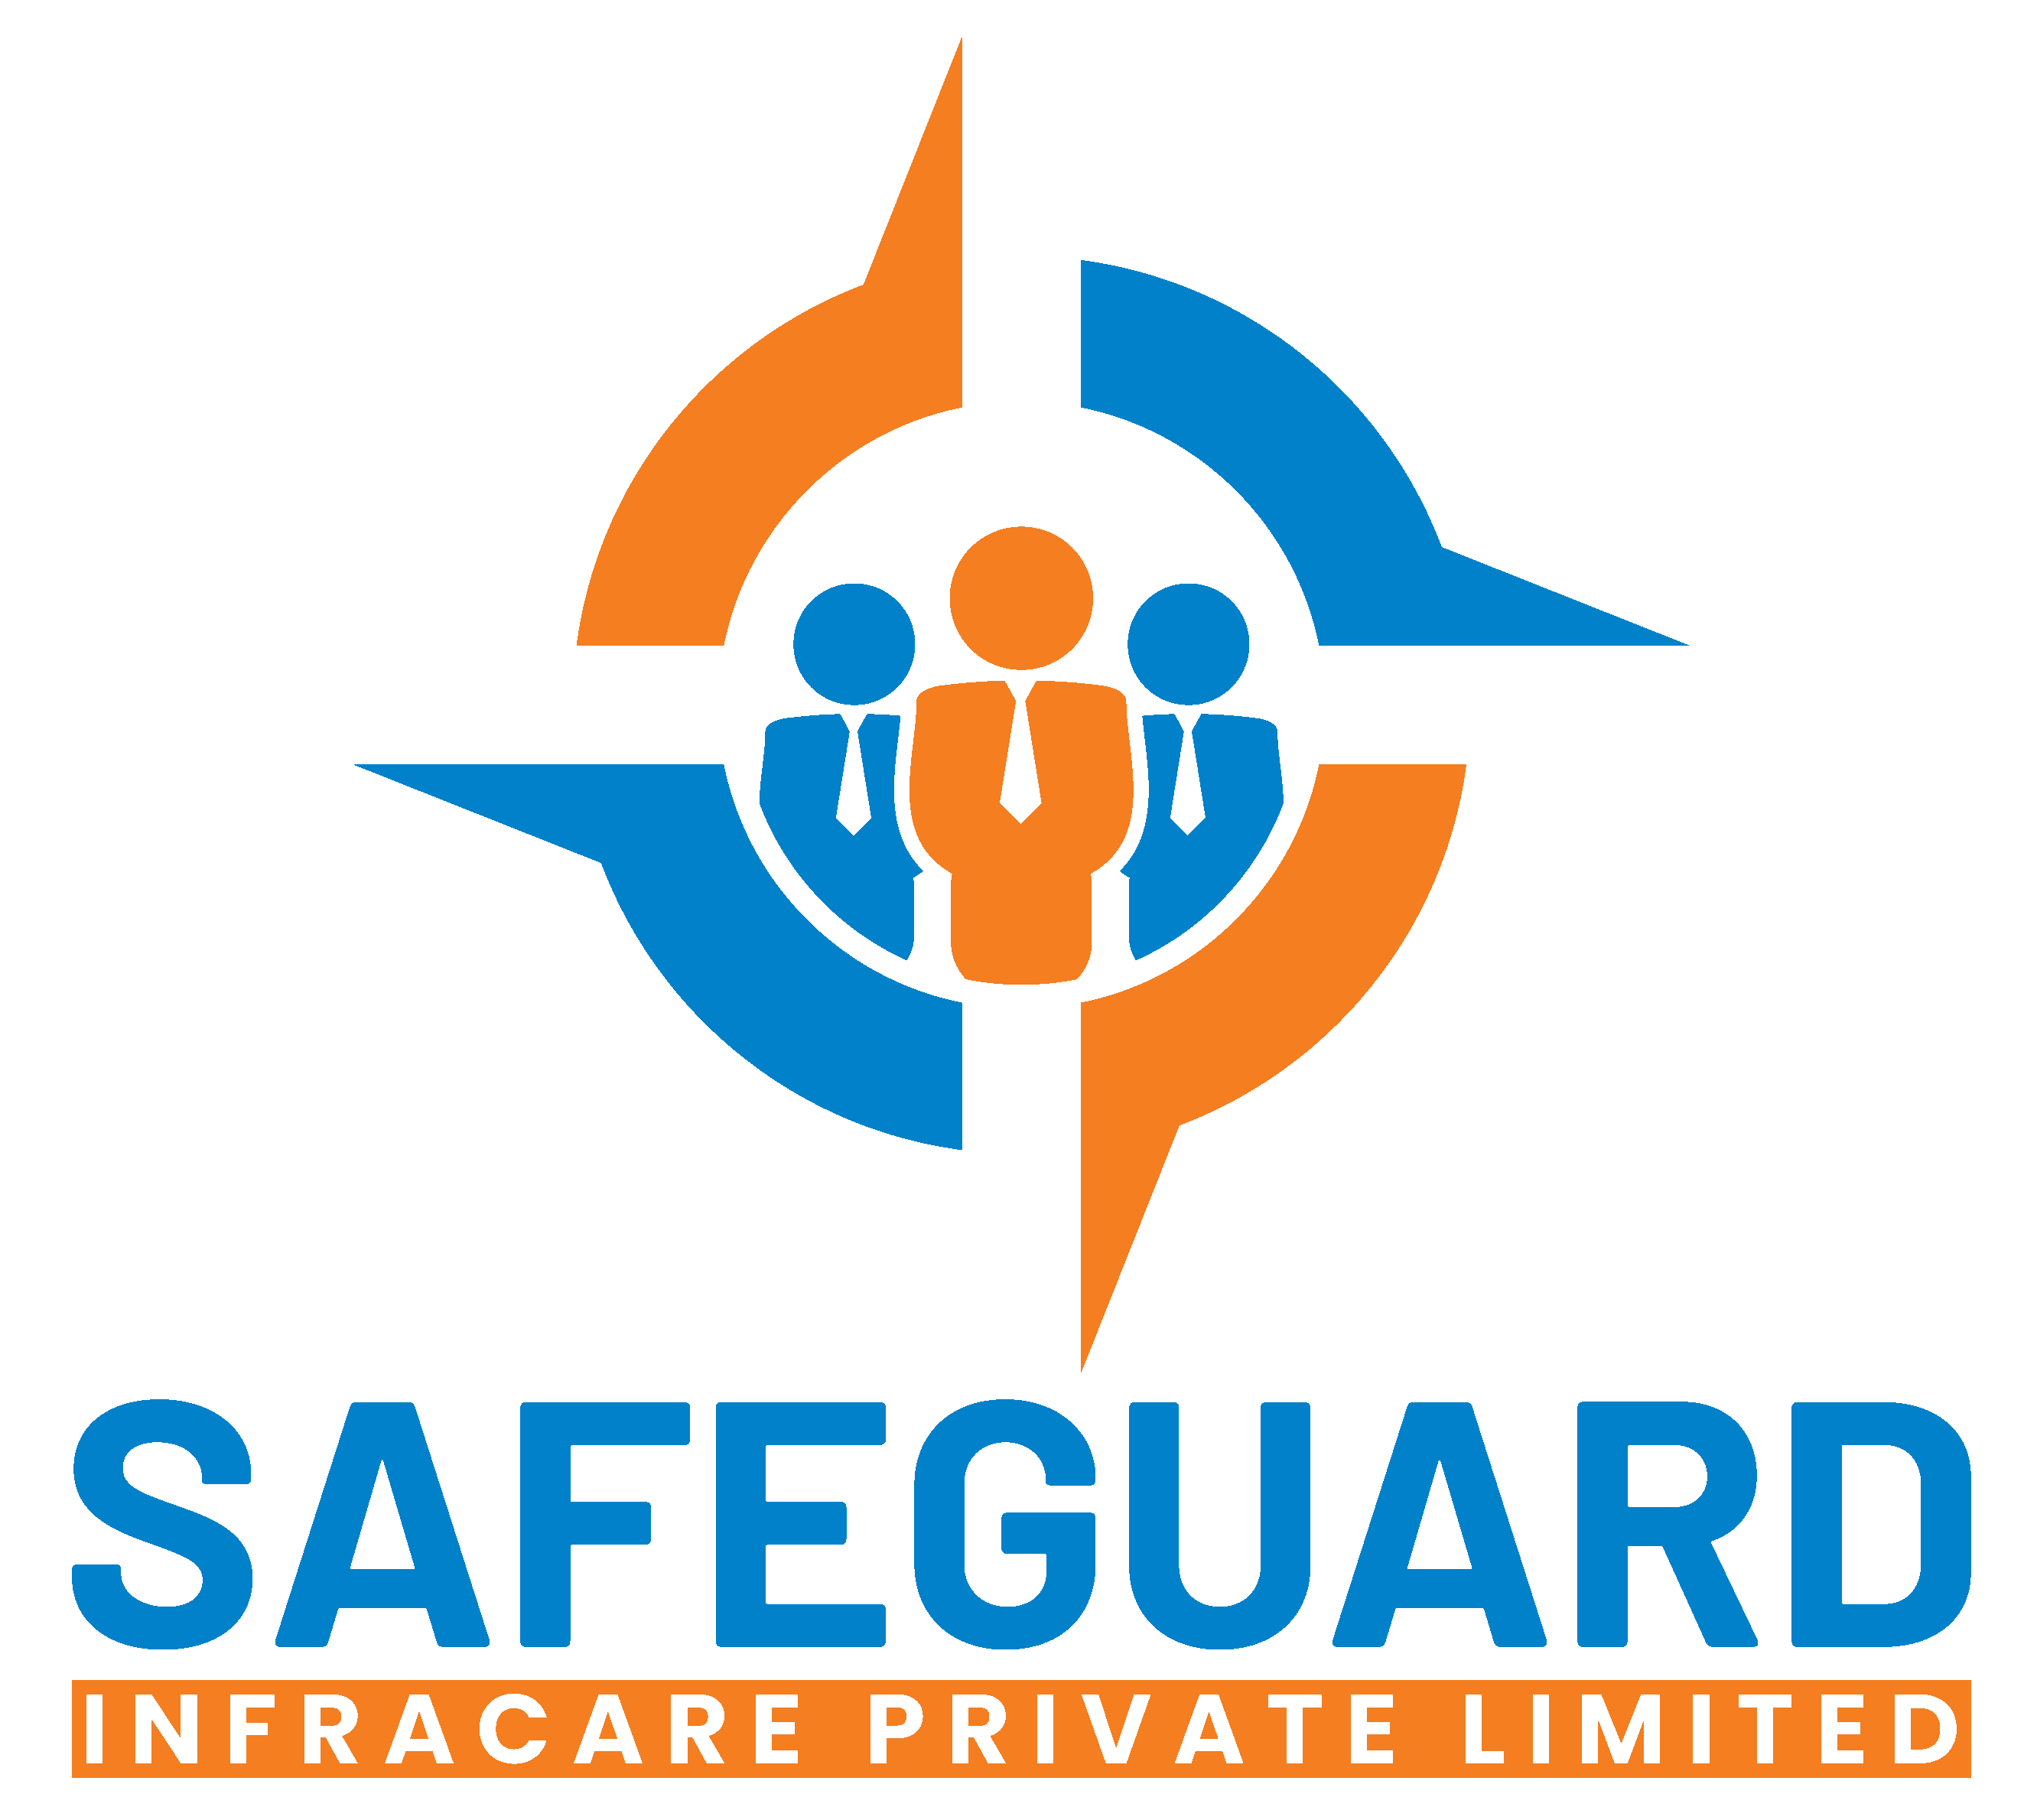 SAFEGUARD INFRACARE PRIVATE LIMITED